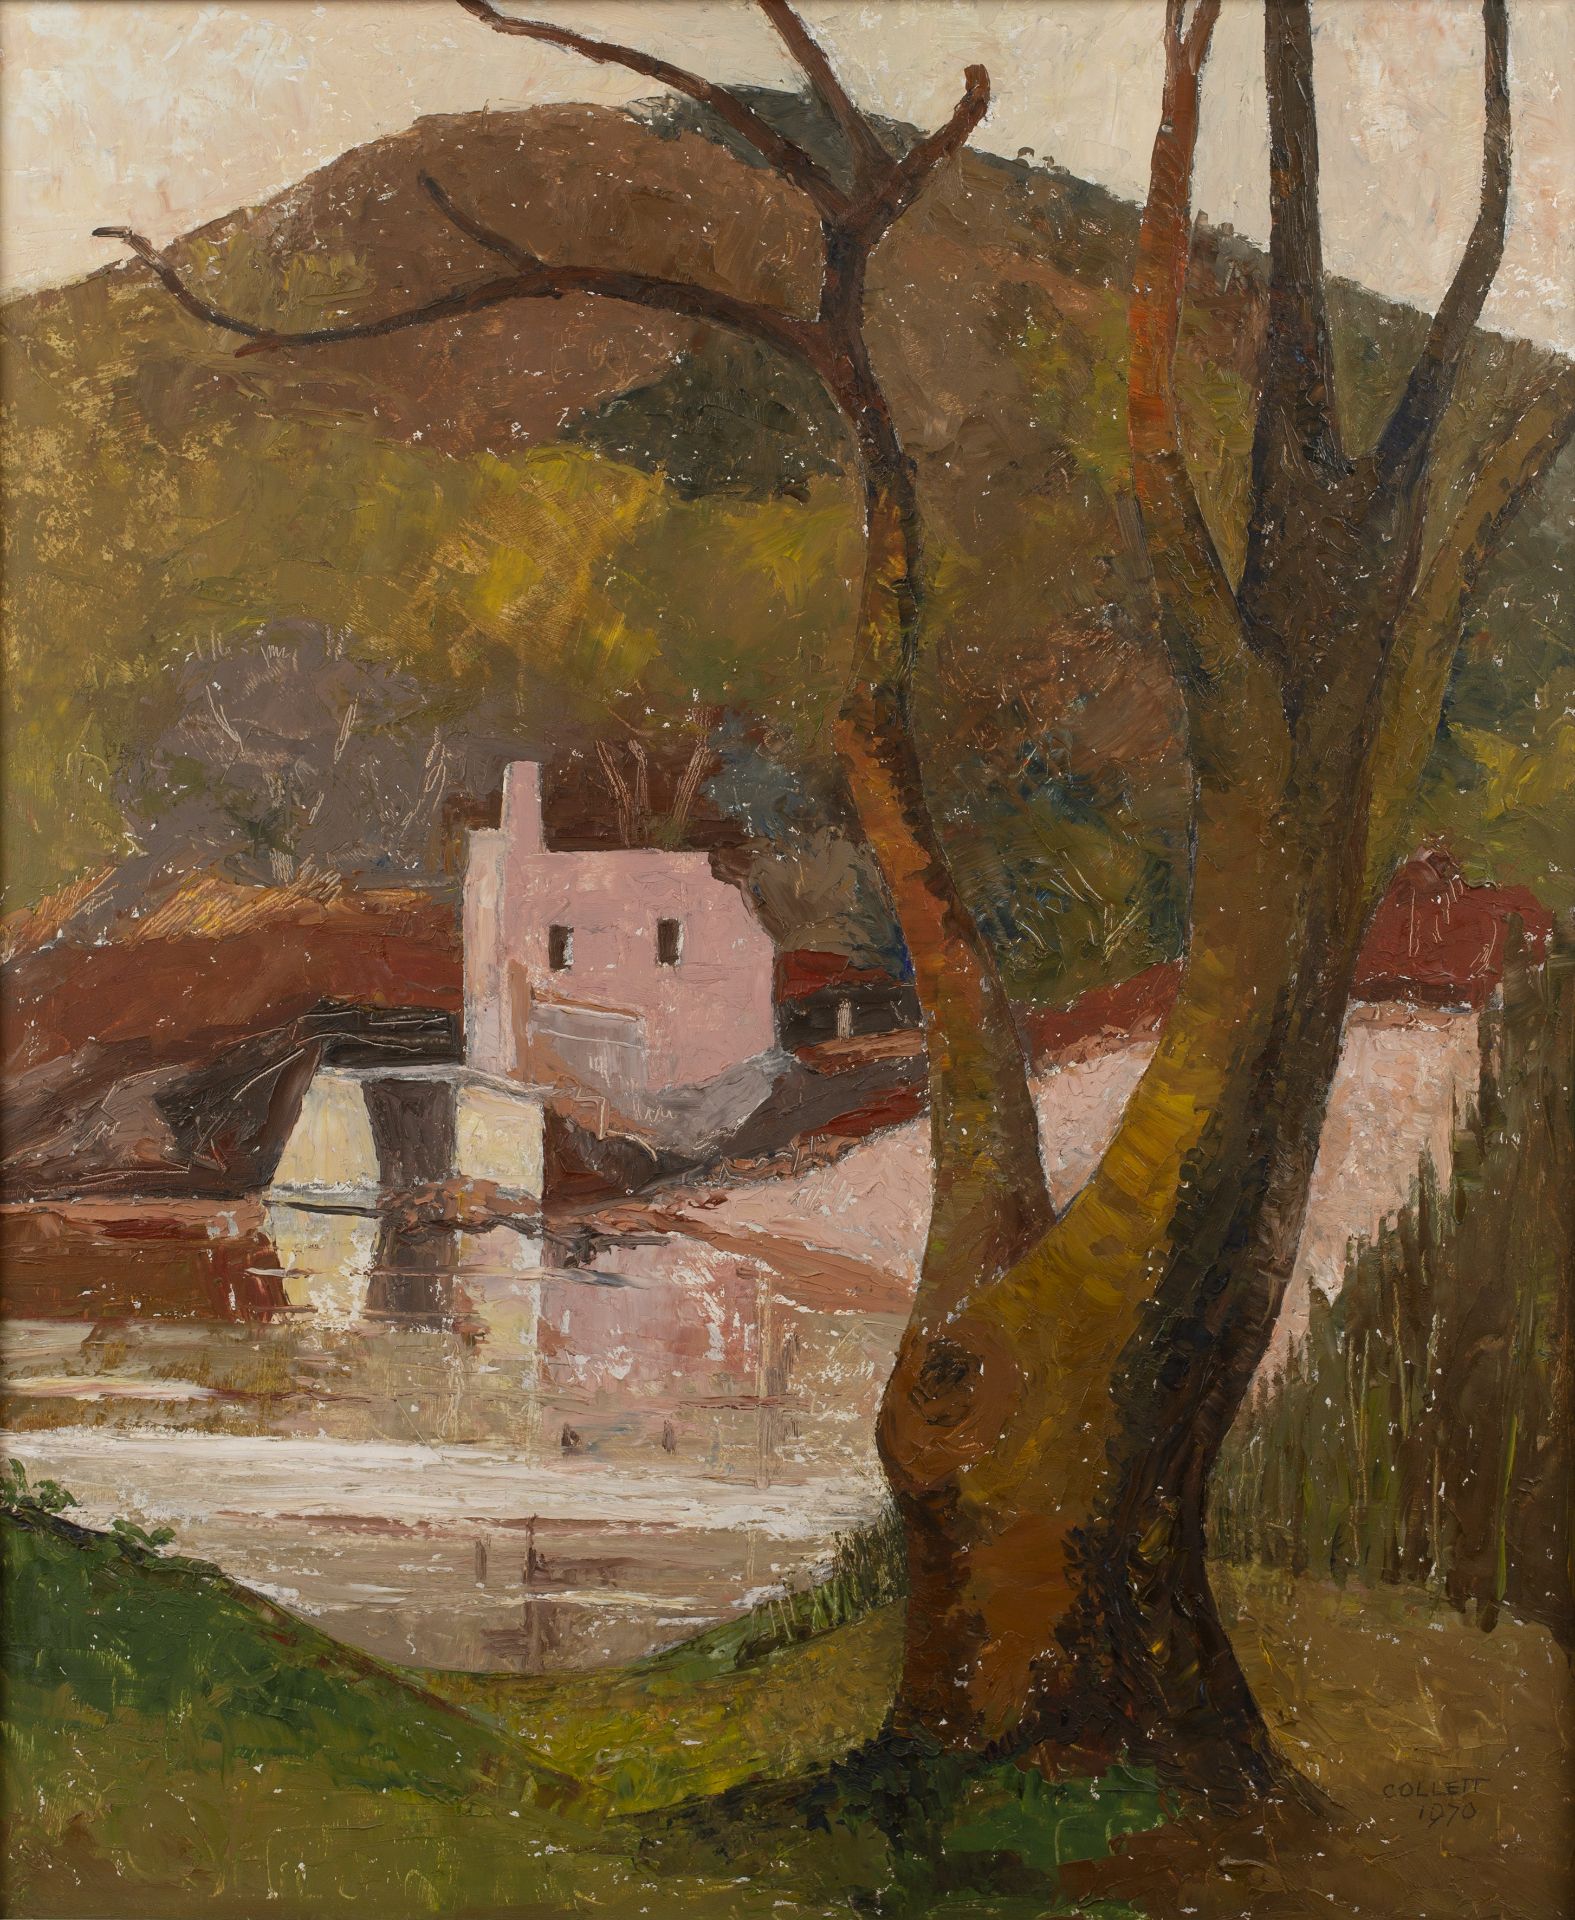 Olive Collett (20th Century School) 'Down Devon way', oil on panel, signed and dated 1970 lower